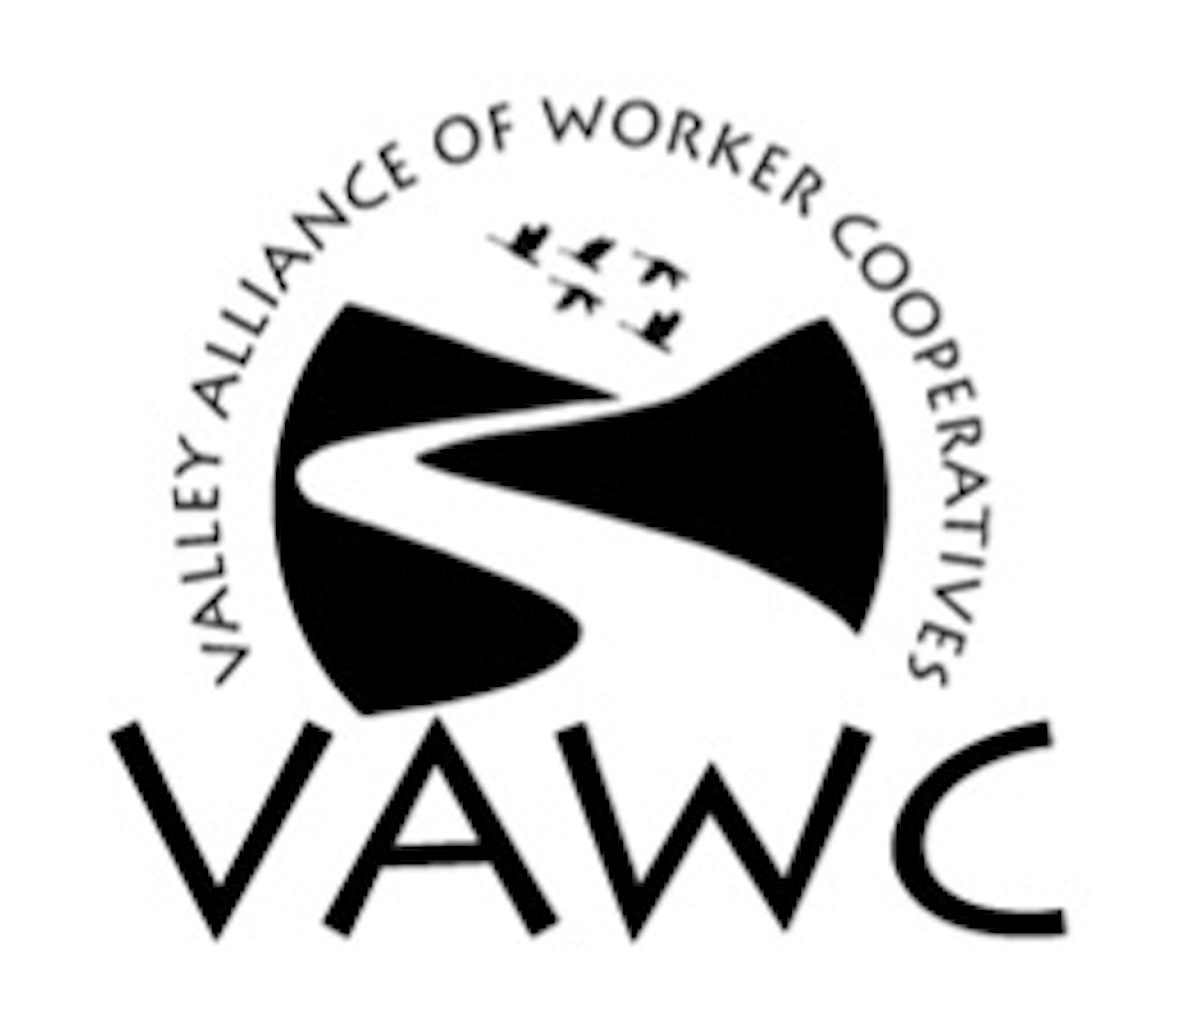 Valley Alliance of Worker Co-operatives